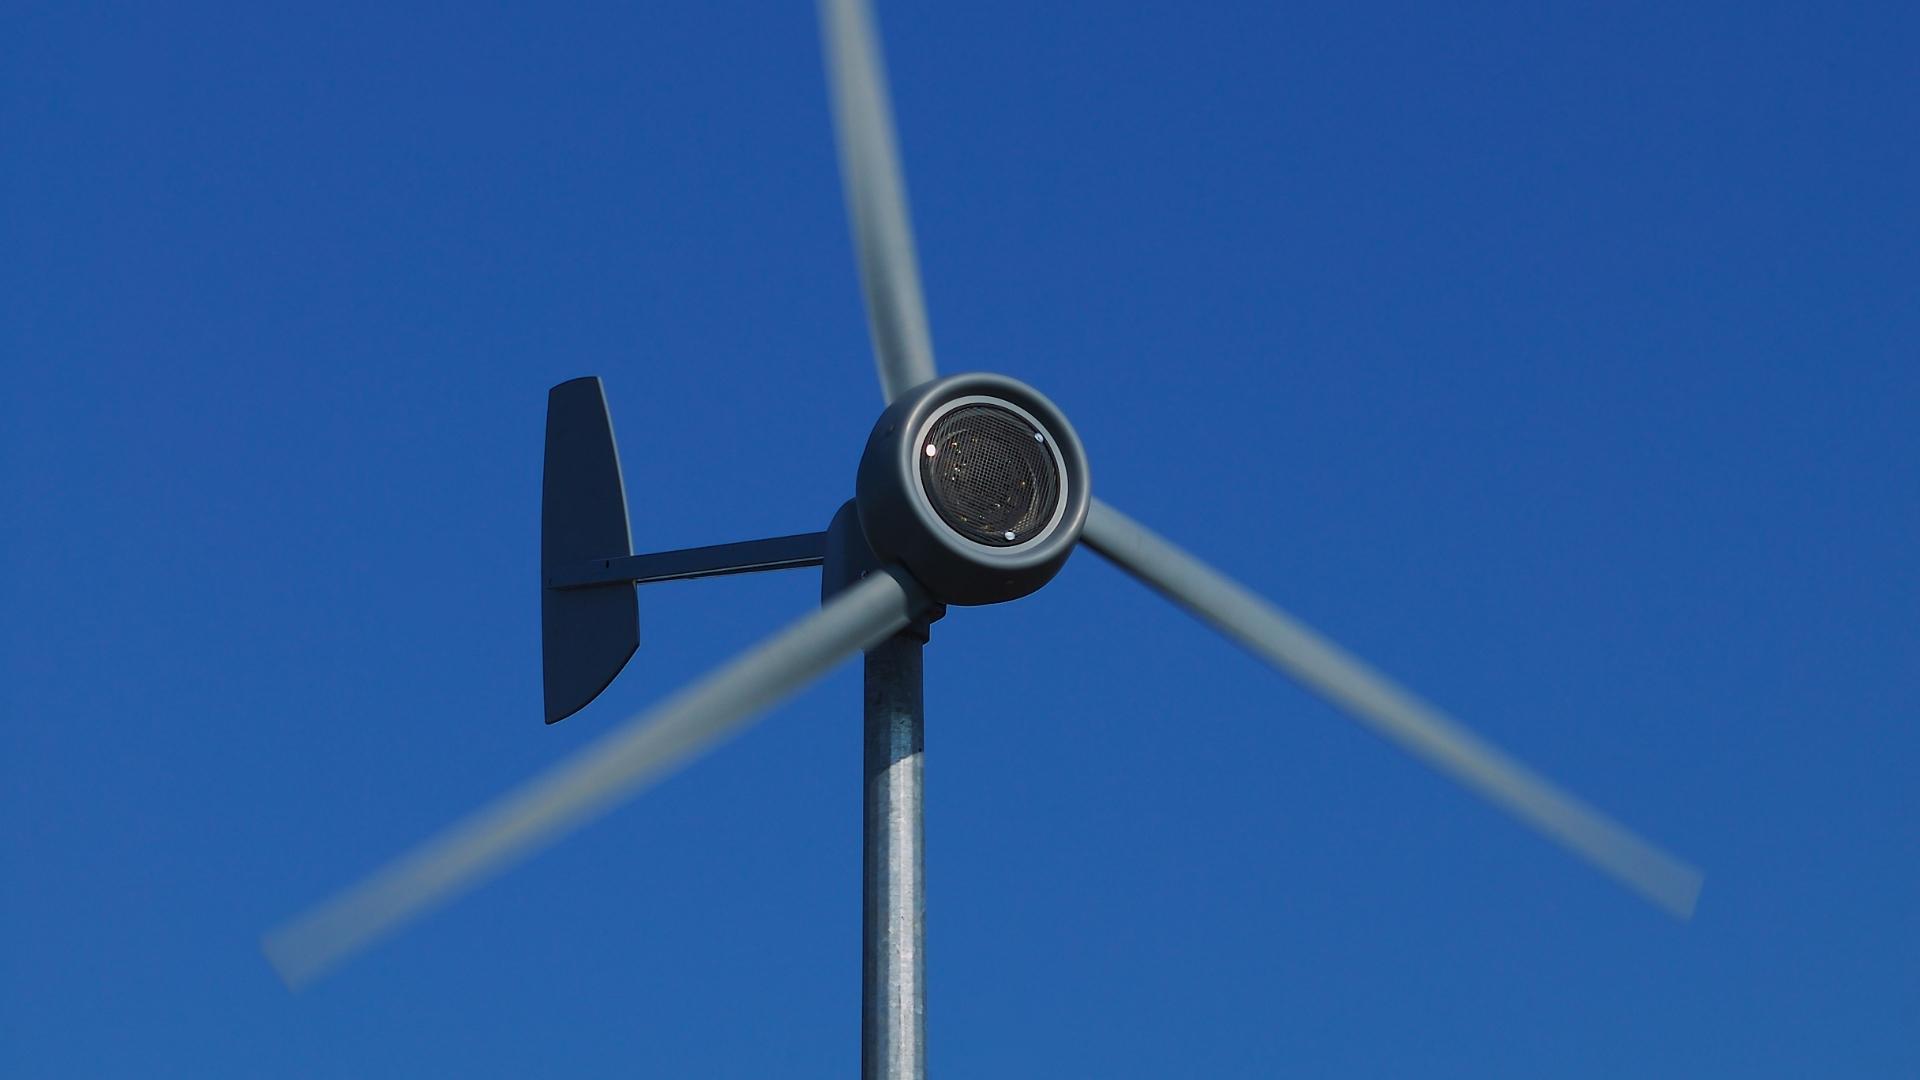 Photo of the blades of a wind turbine spinning in windy conditions